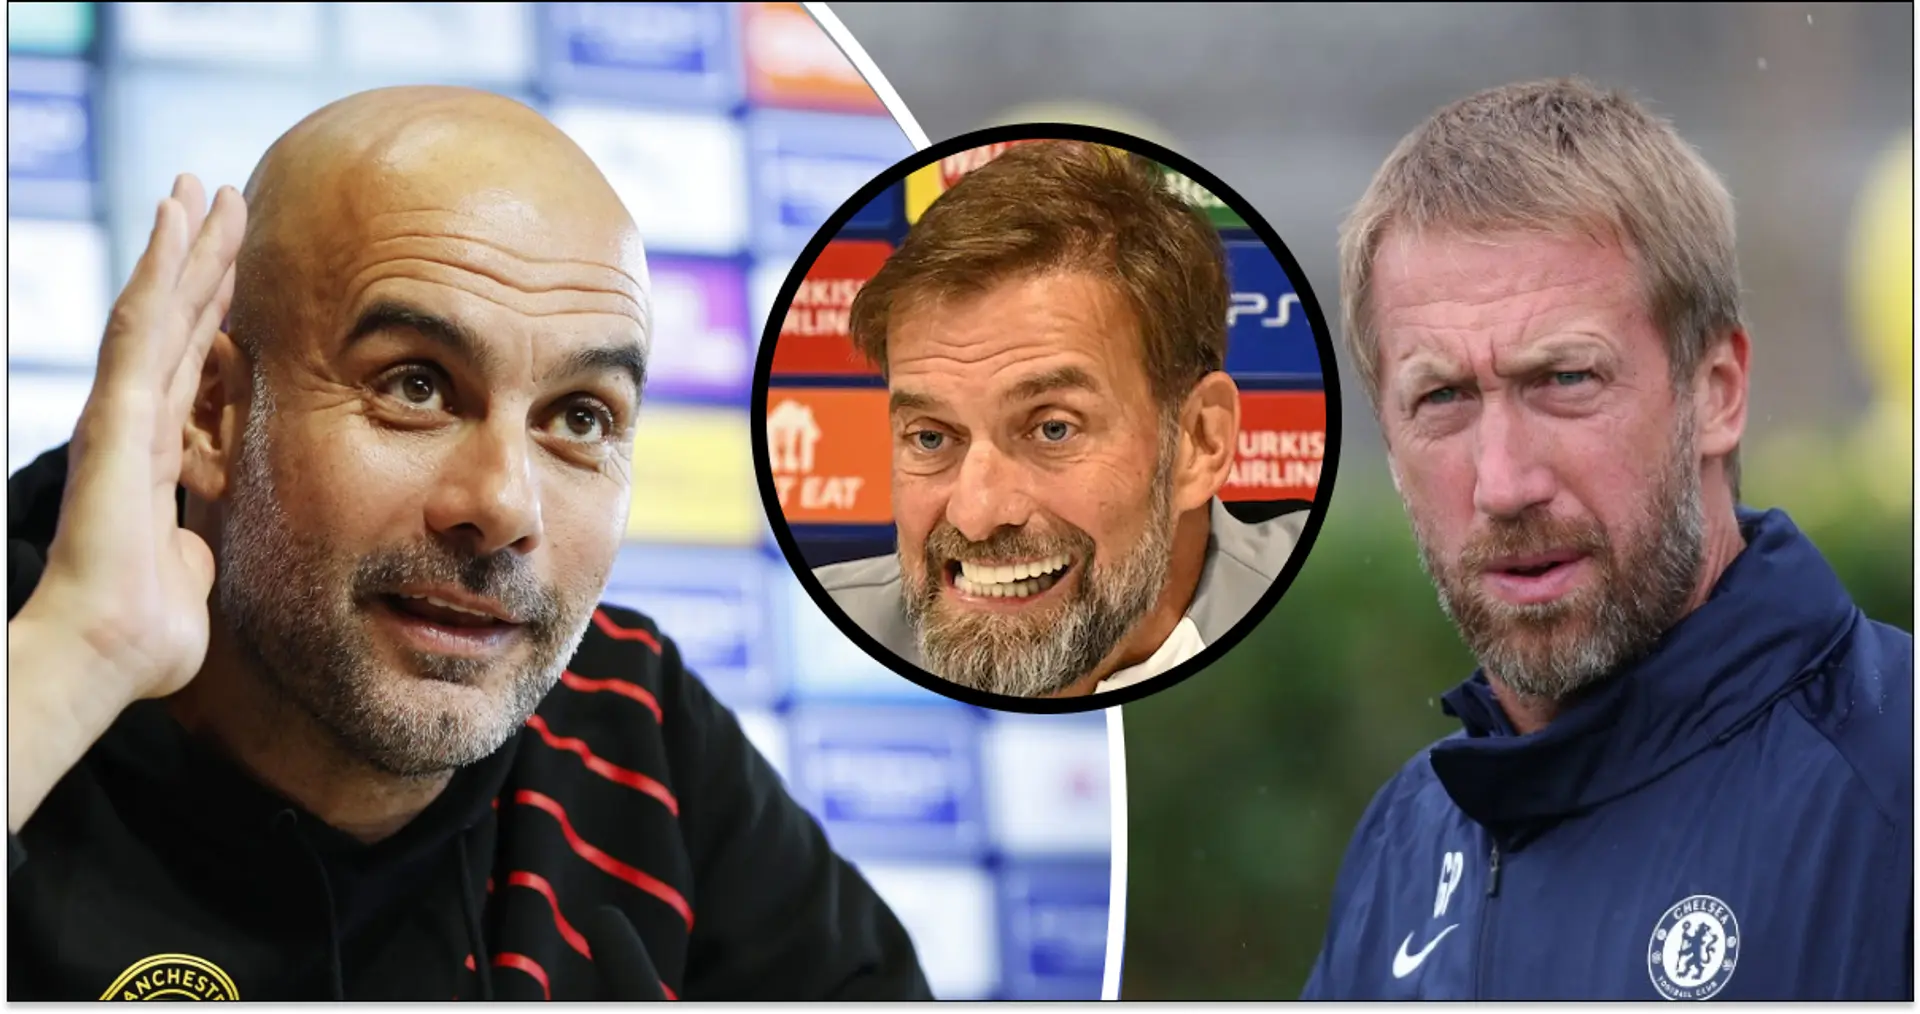 Two City games & Liverpool in 16-day span: Chelsea's crazy schedule after World Cup